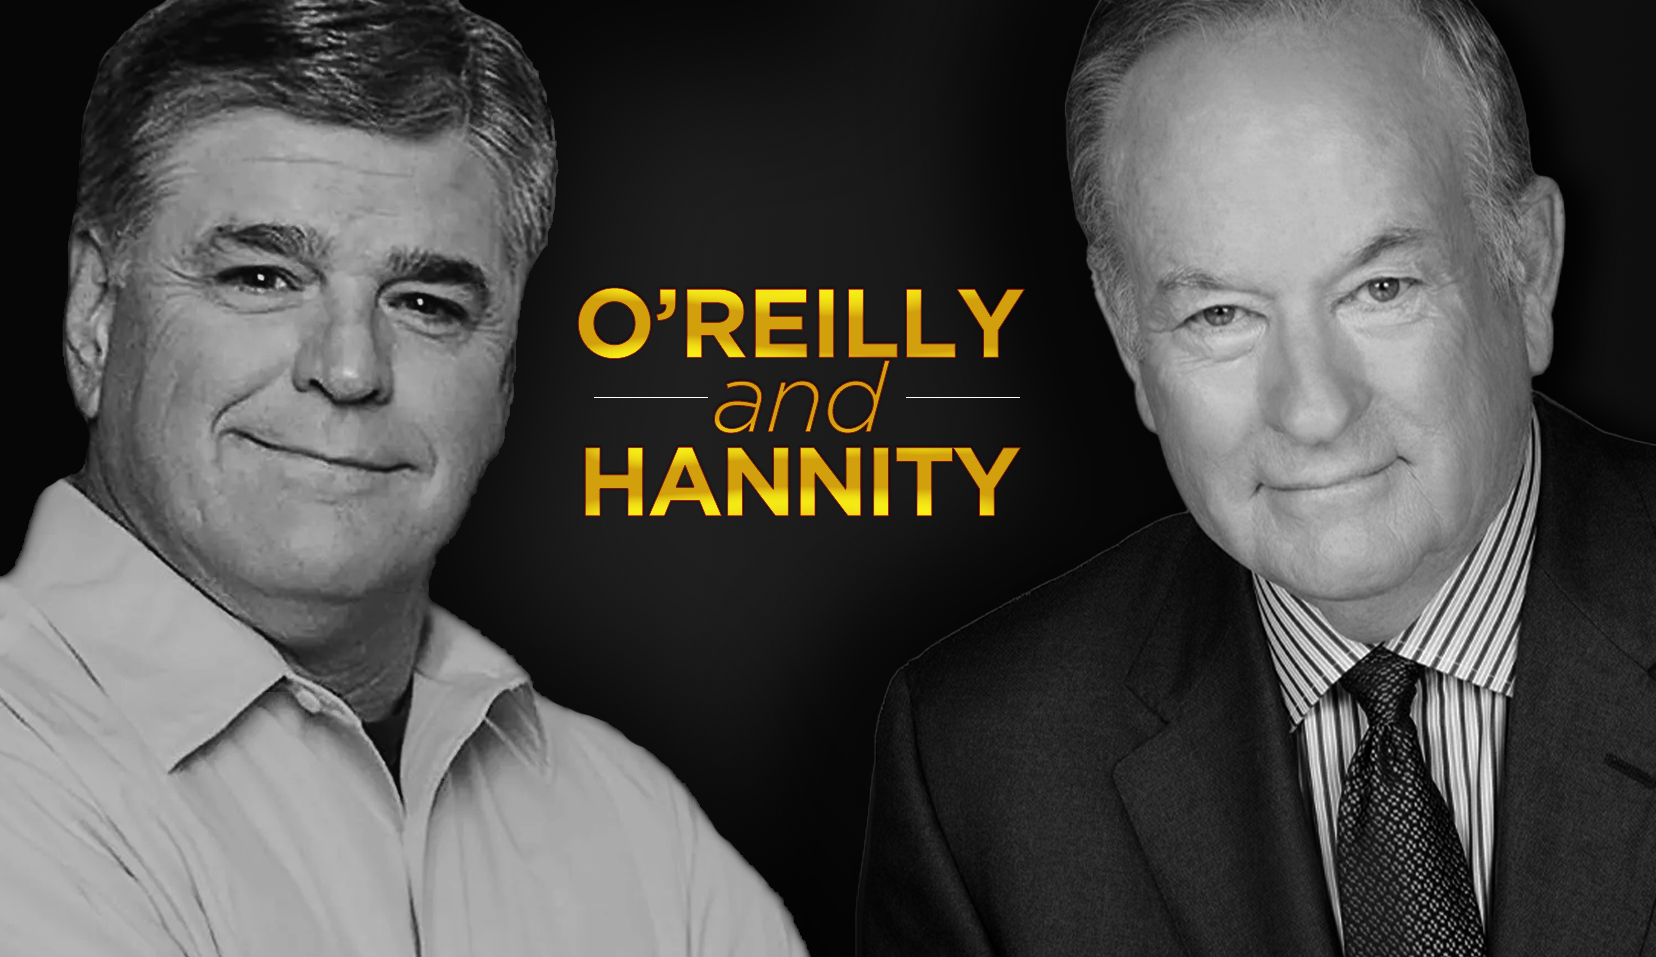 Listen: O'Reilly & Hannity Discuss the Canadian Truckers, Joe Rogan and Covid